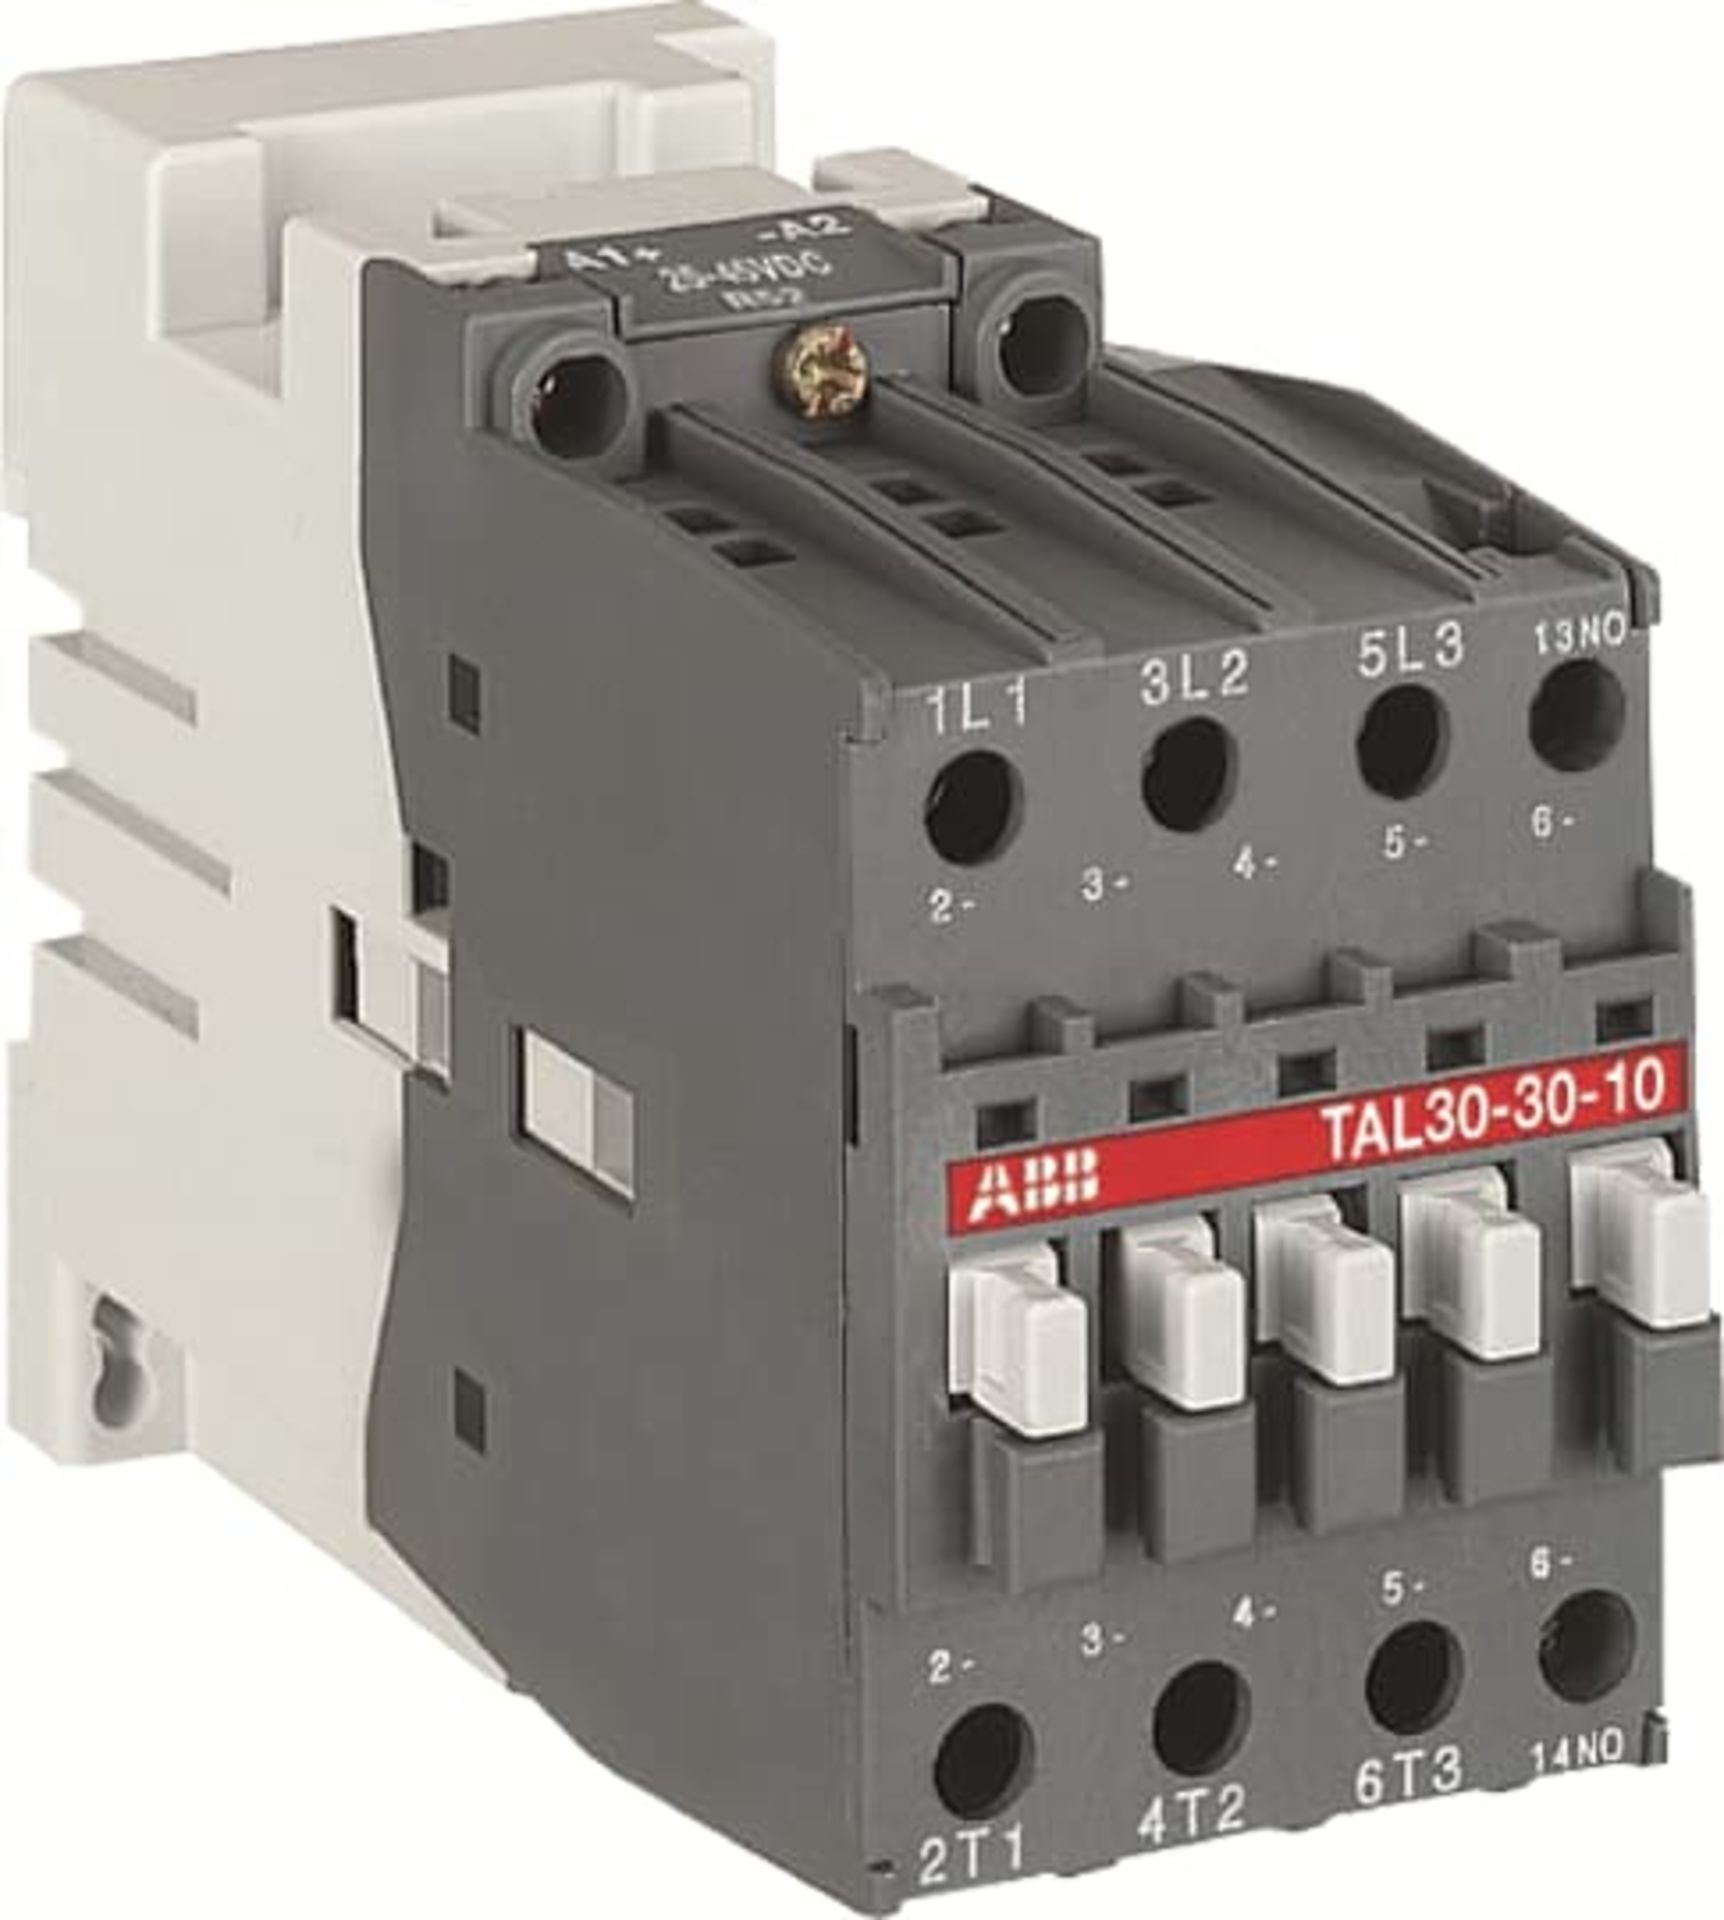 12x ABB TAL 30-30-01 ELECTRICAL DC CONTACTOR - NEW SEALED RRP £1800